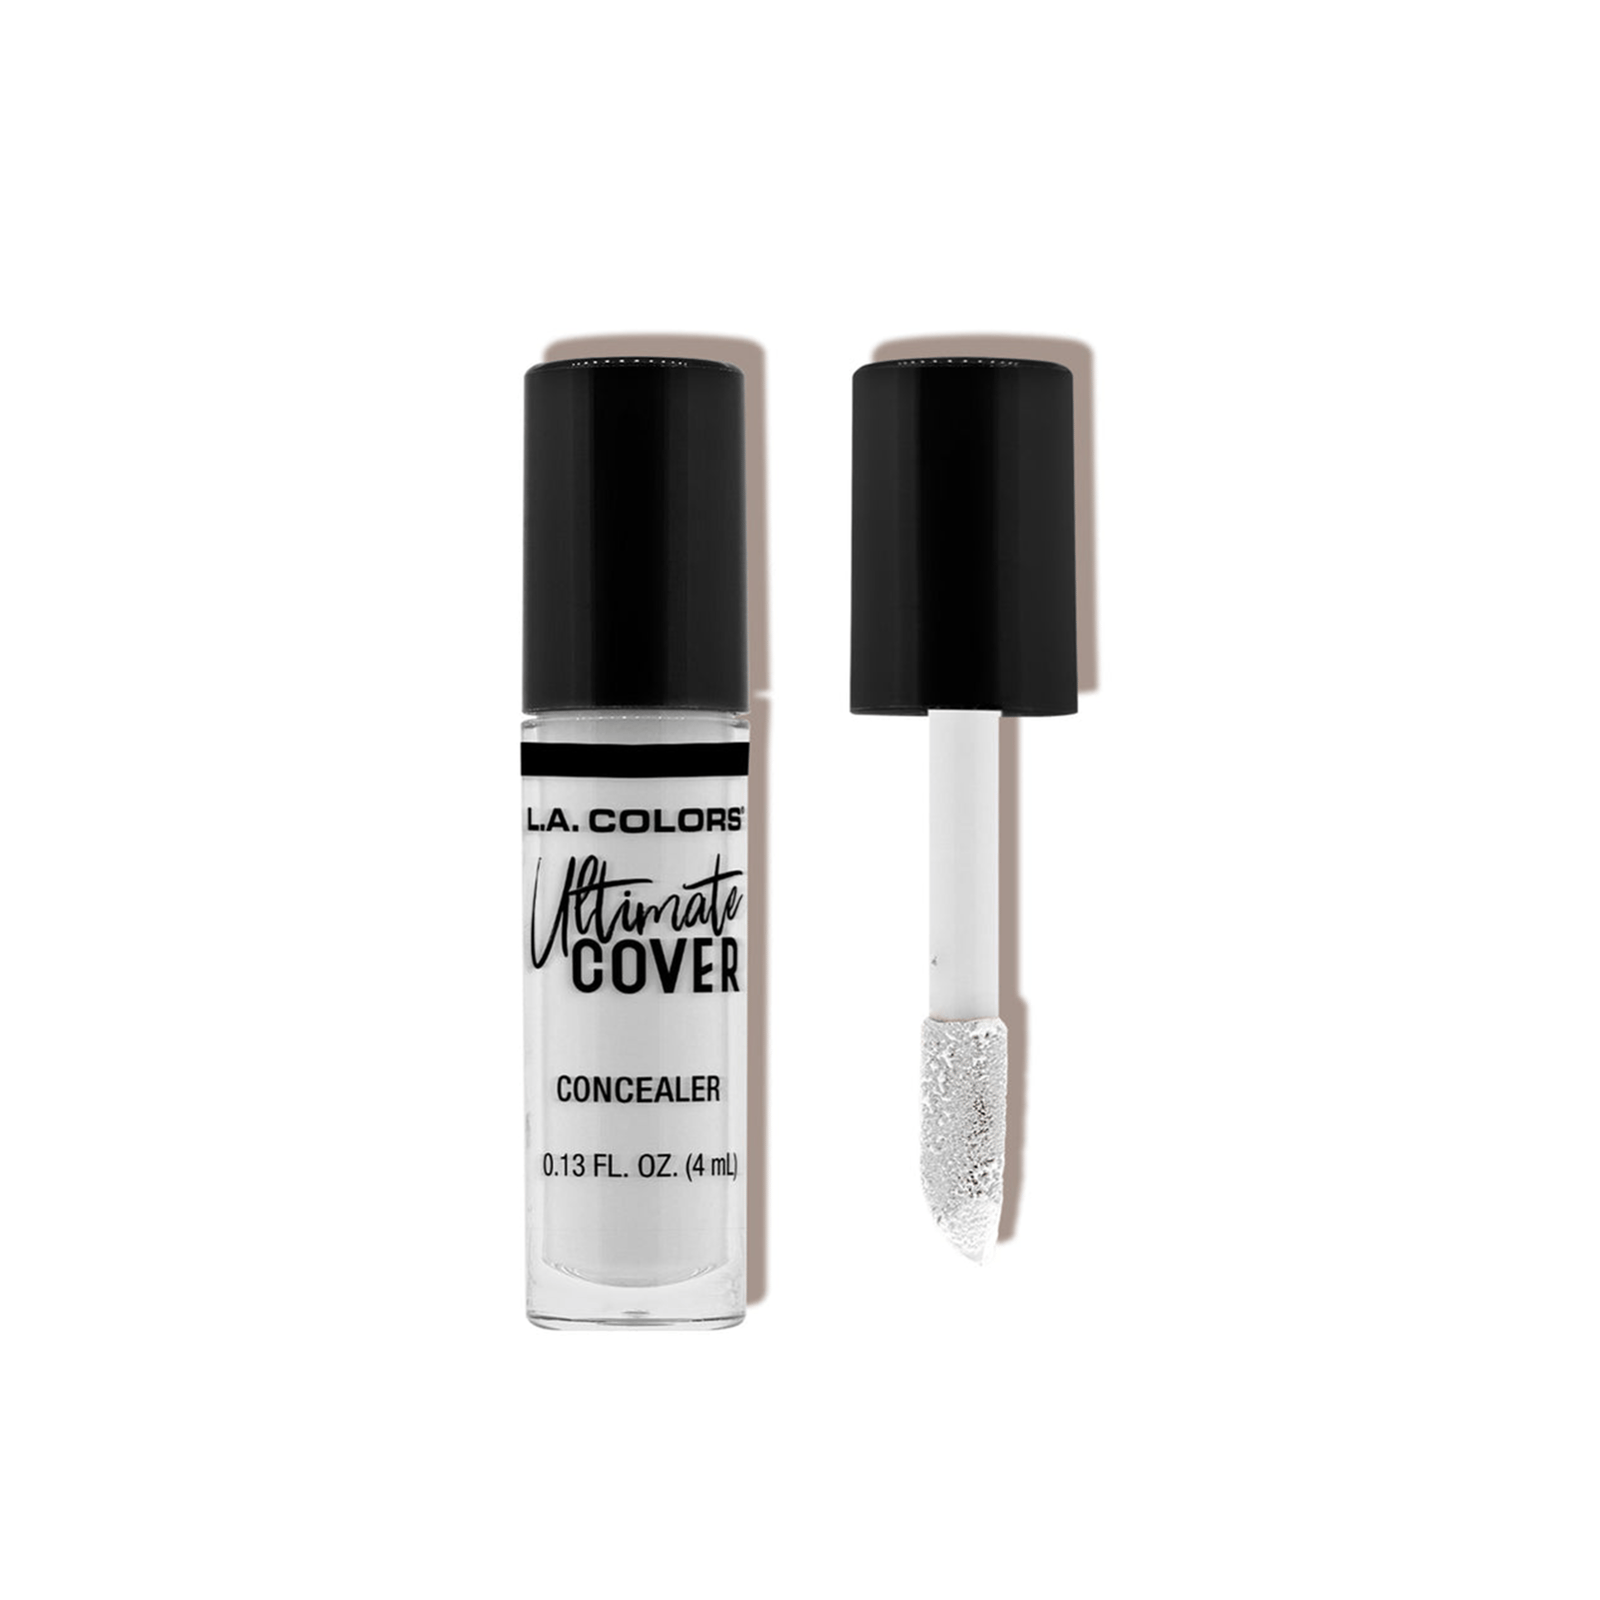 L.A. Colors Ultimate Cover Concealer CC901 Sheer White Corrector 4ml